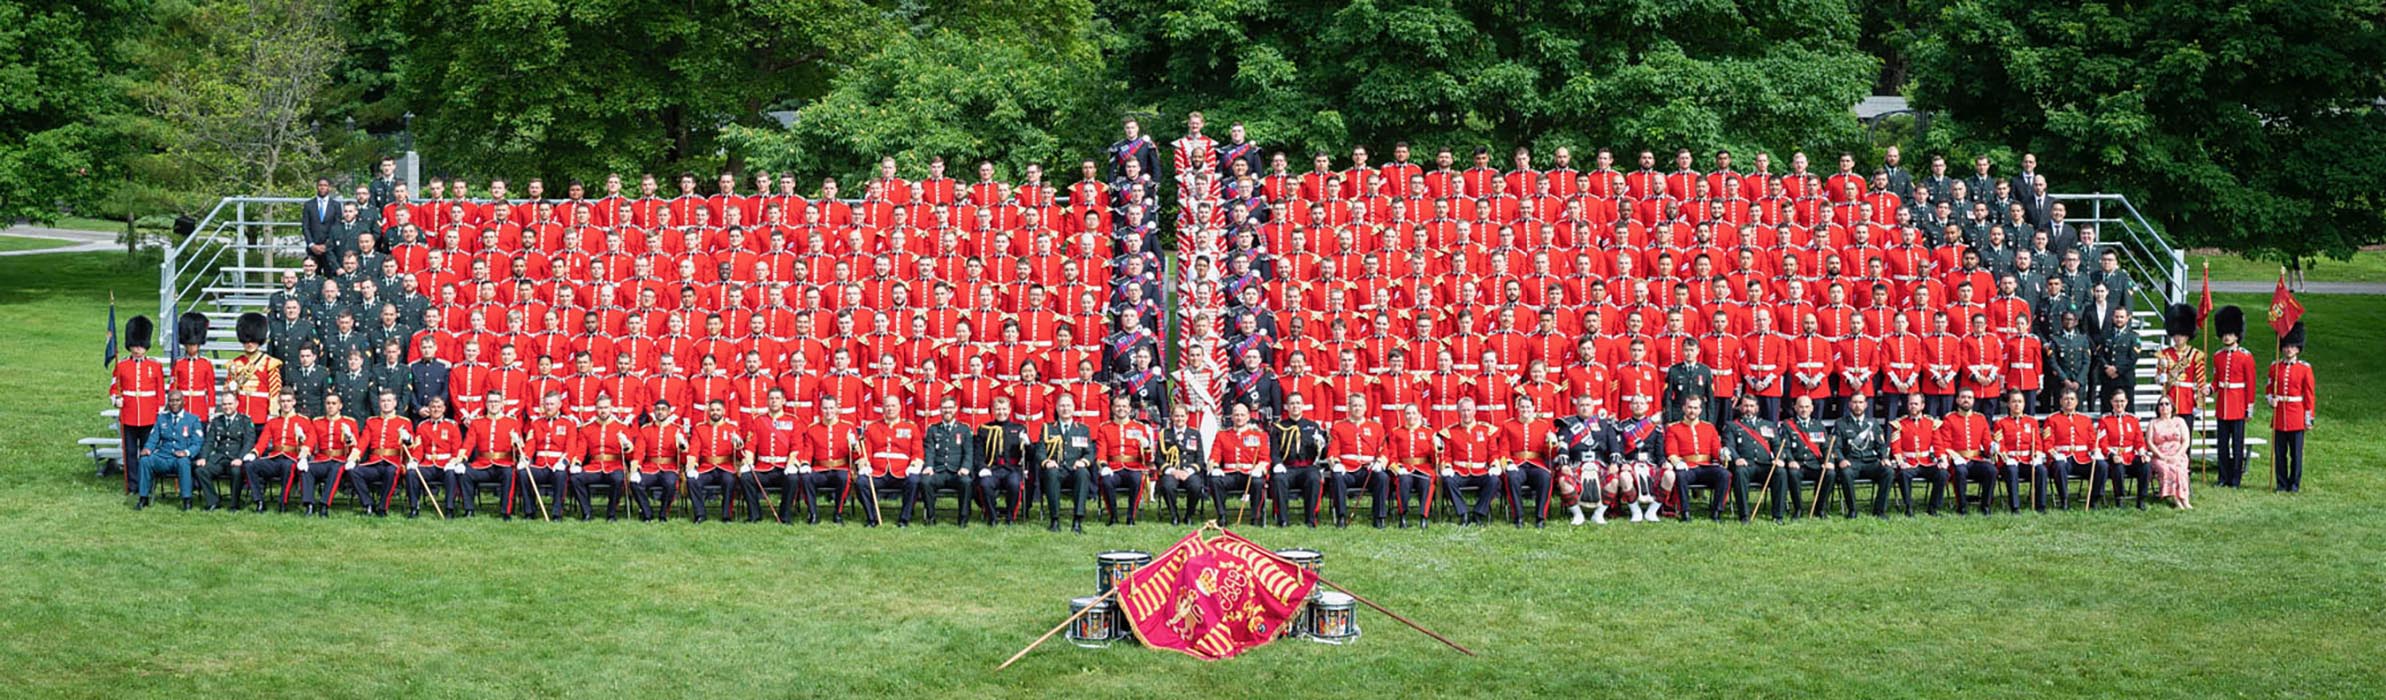 Group photo of the 360 members of the 2019 Ceremonial Guard taken at Rideau Hall in Ottawa, Ontario on June 21, 2019. 
Photo: Sergeant Johanie Maheu, Canadian Forces Support Unit (Ottawa). ©2019 DND/MDN Canada.